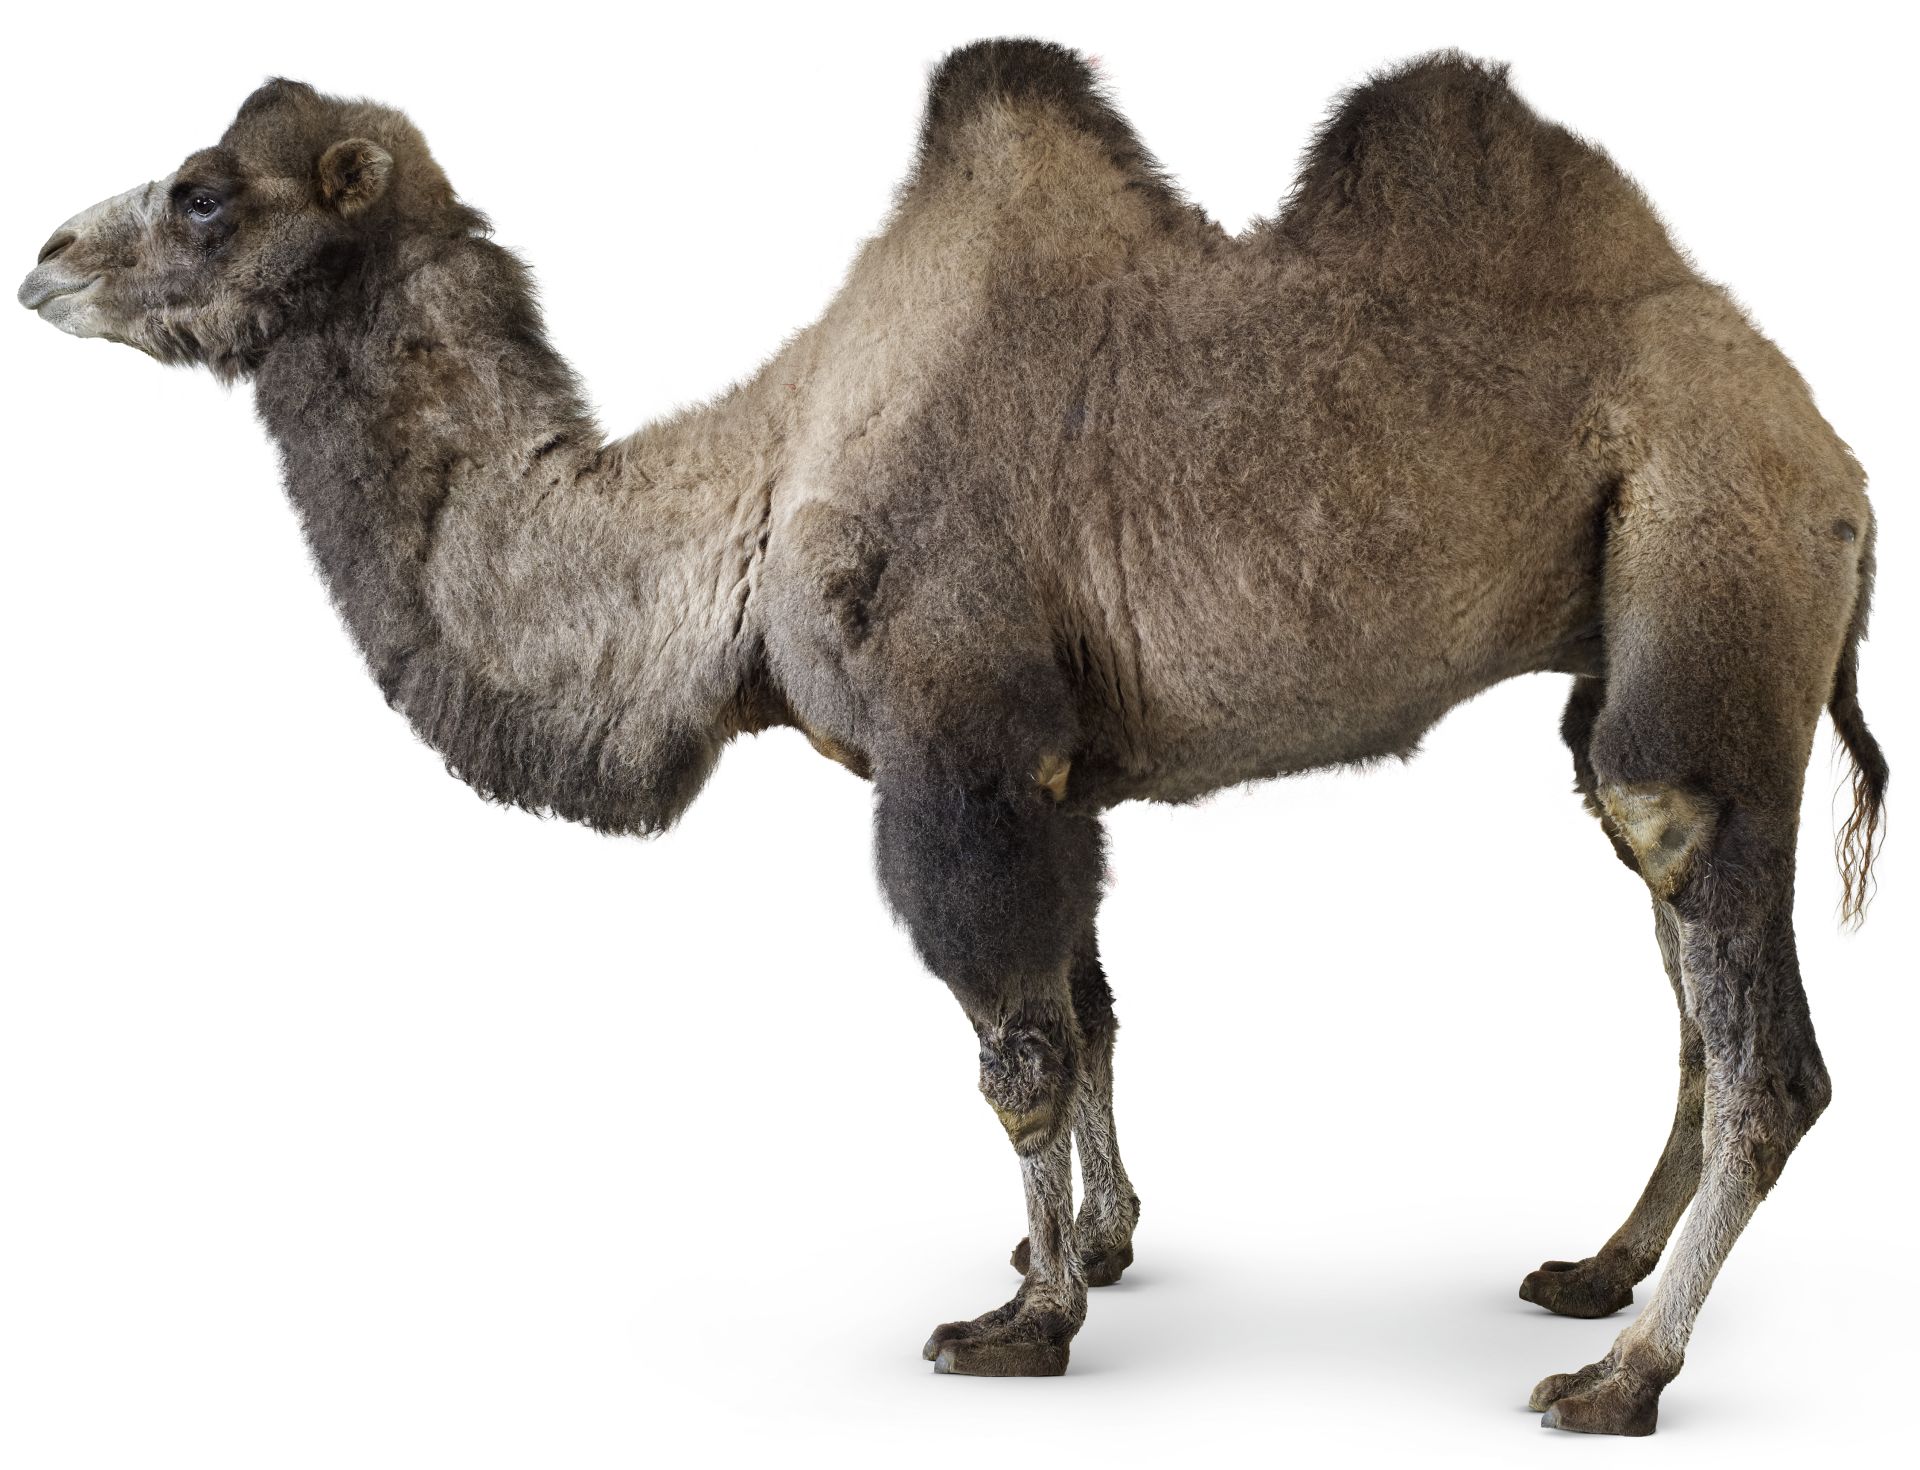 Two Humped Camel | Bactrian Camel Facts | DK Find Out